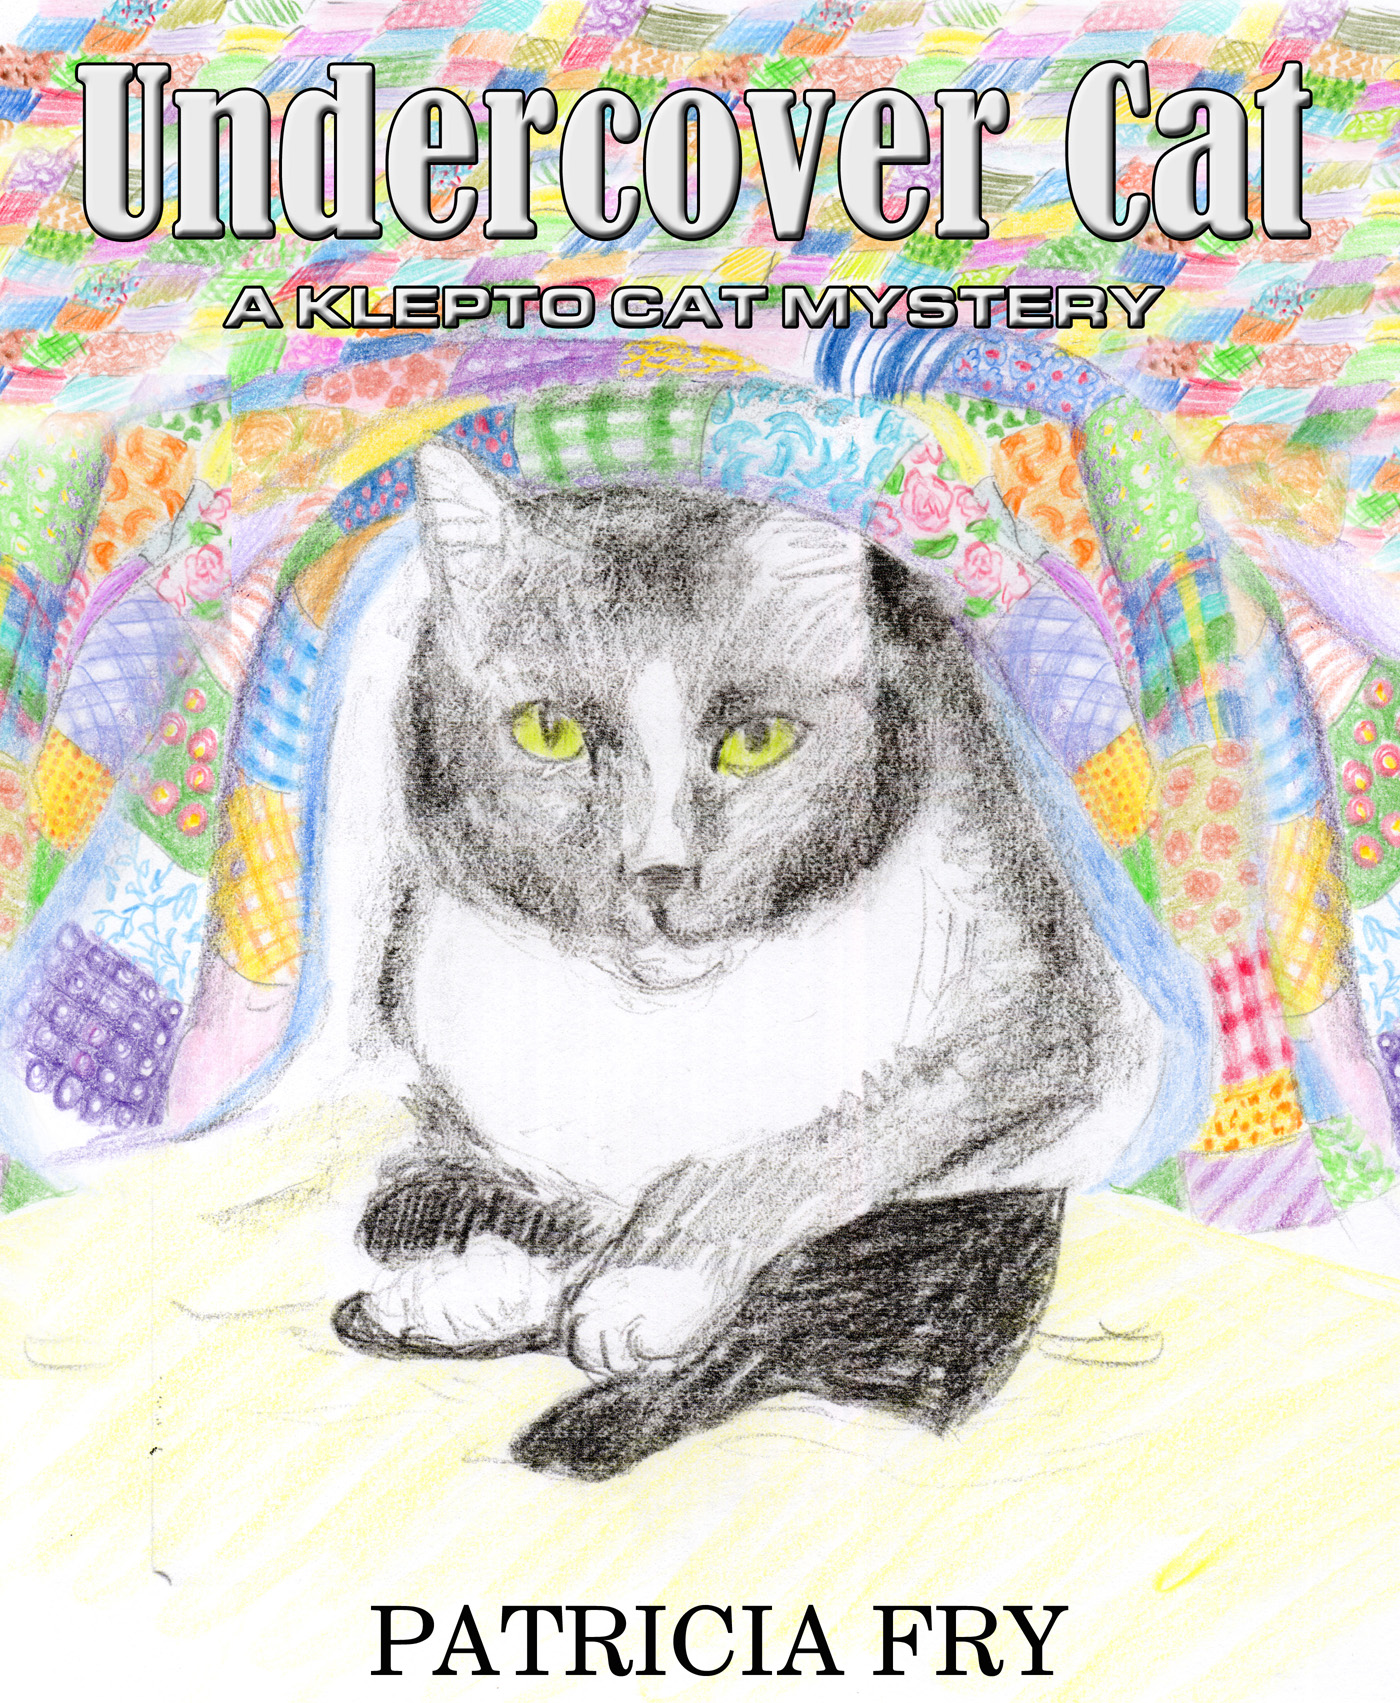 pencil sketch of cat under quilt with glove